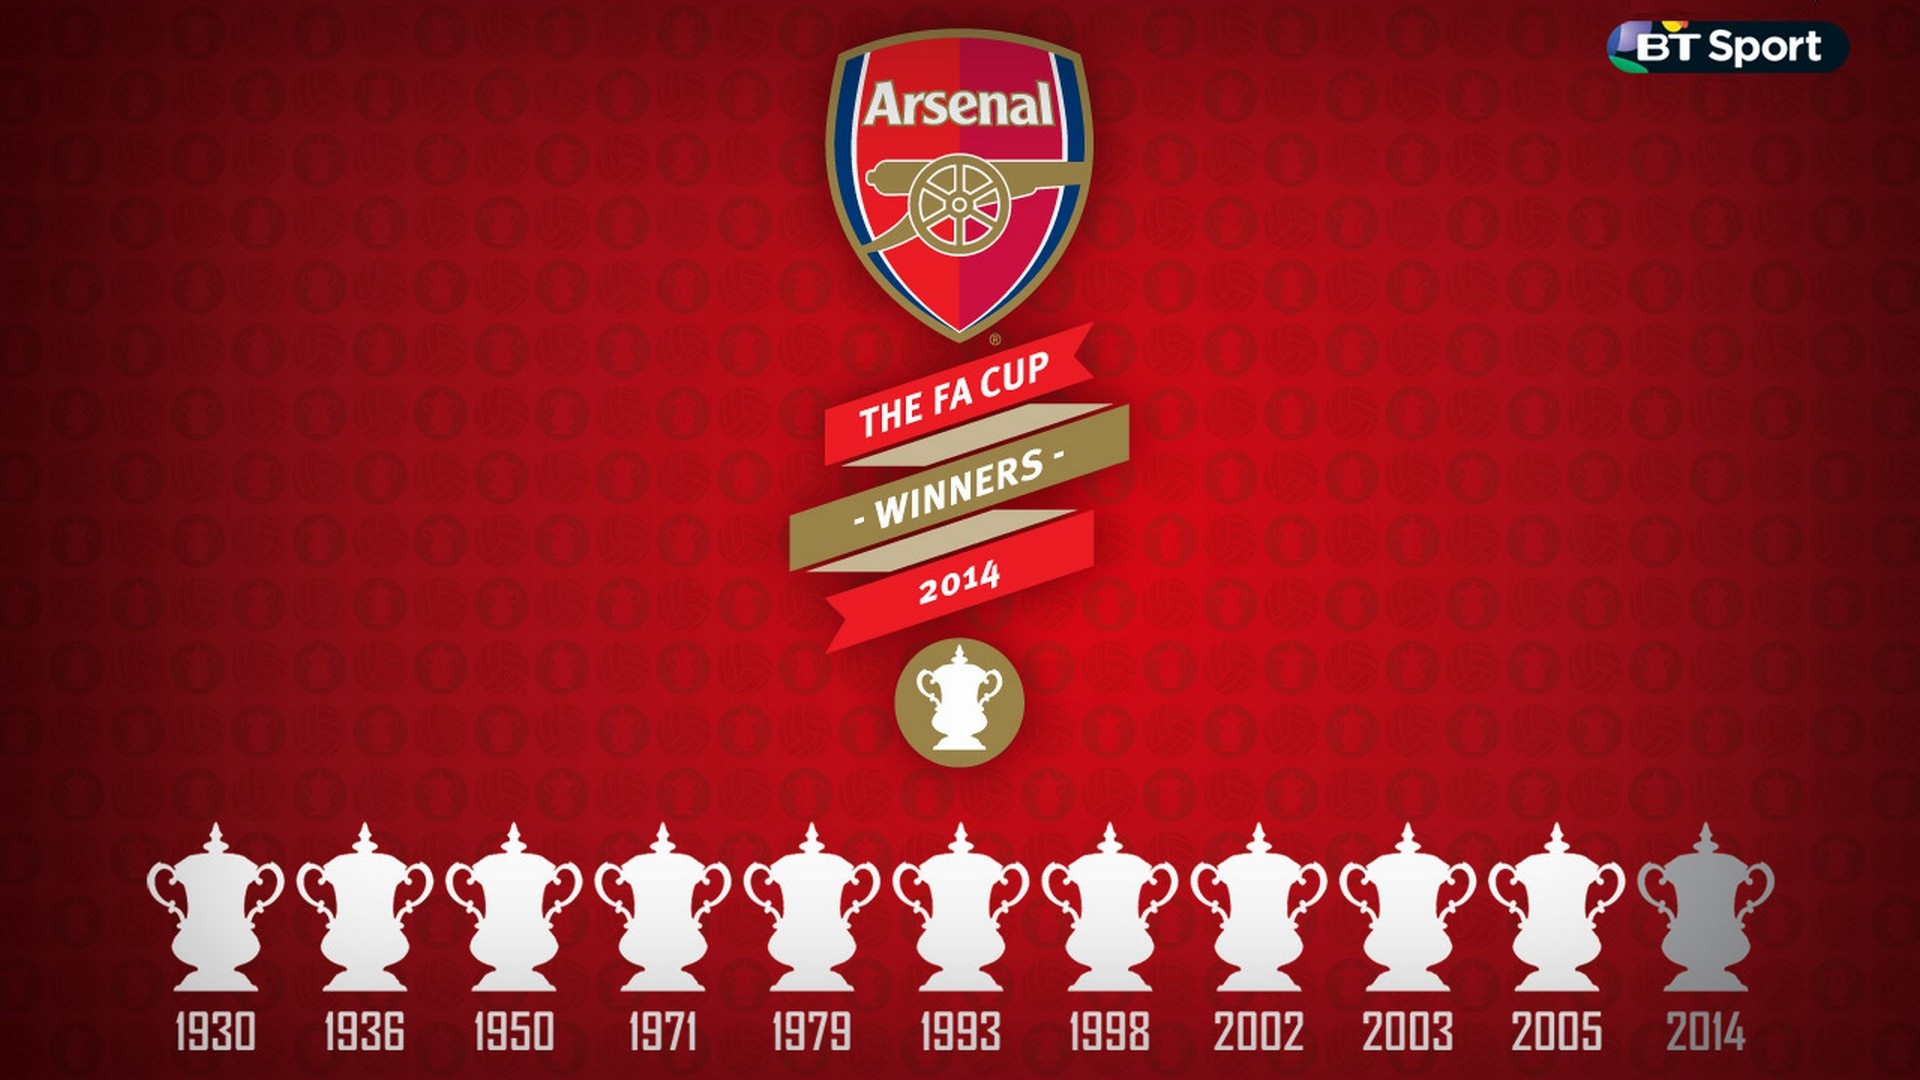 Wallpapers Arsenal FC With high-resolution 1920X1080 pixel. You can use this wallpaper for your Desktop Computers, Mac Screensavers, Windows Backgrounds, iPhone Wallpapers, Tablet or Android Lock screen and another Mobile device